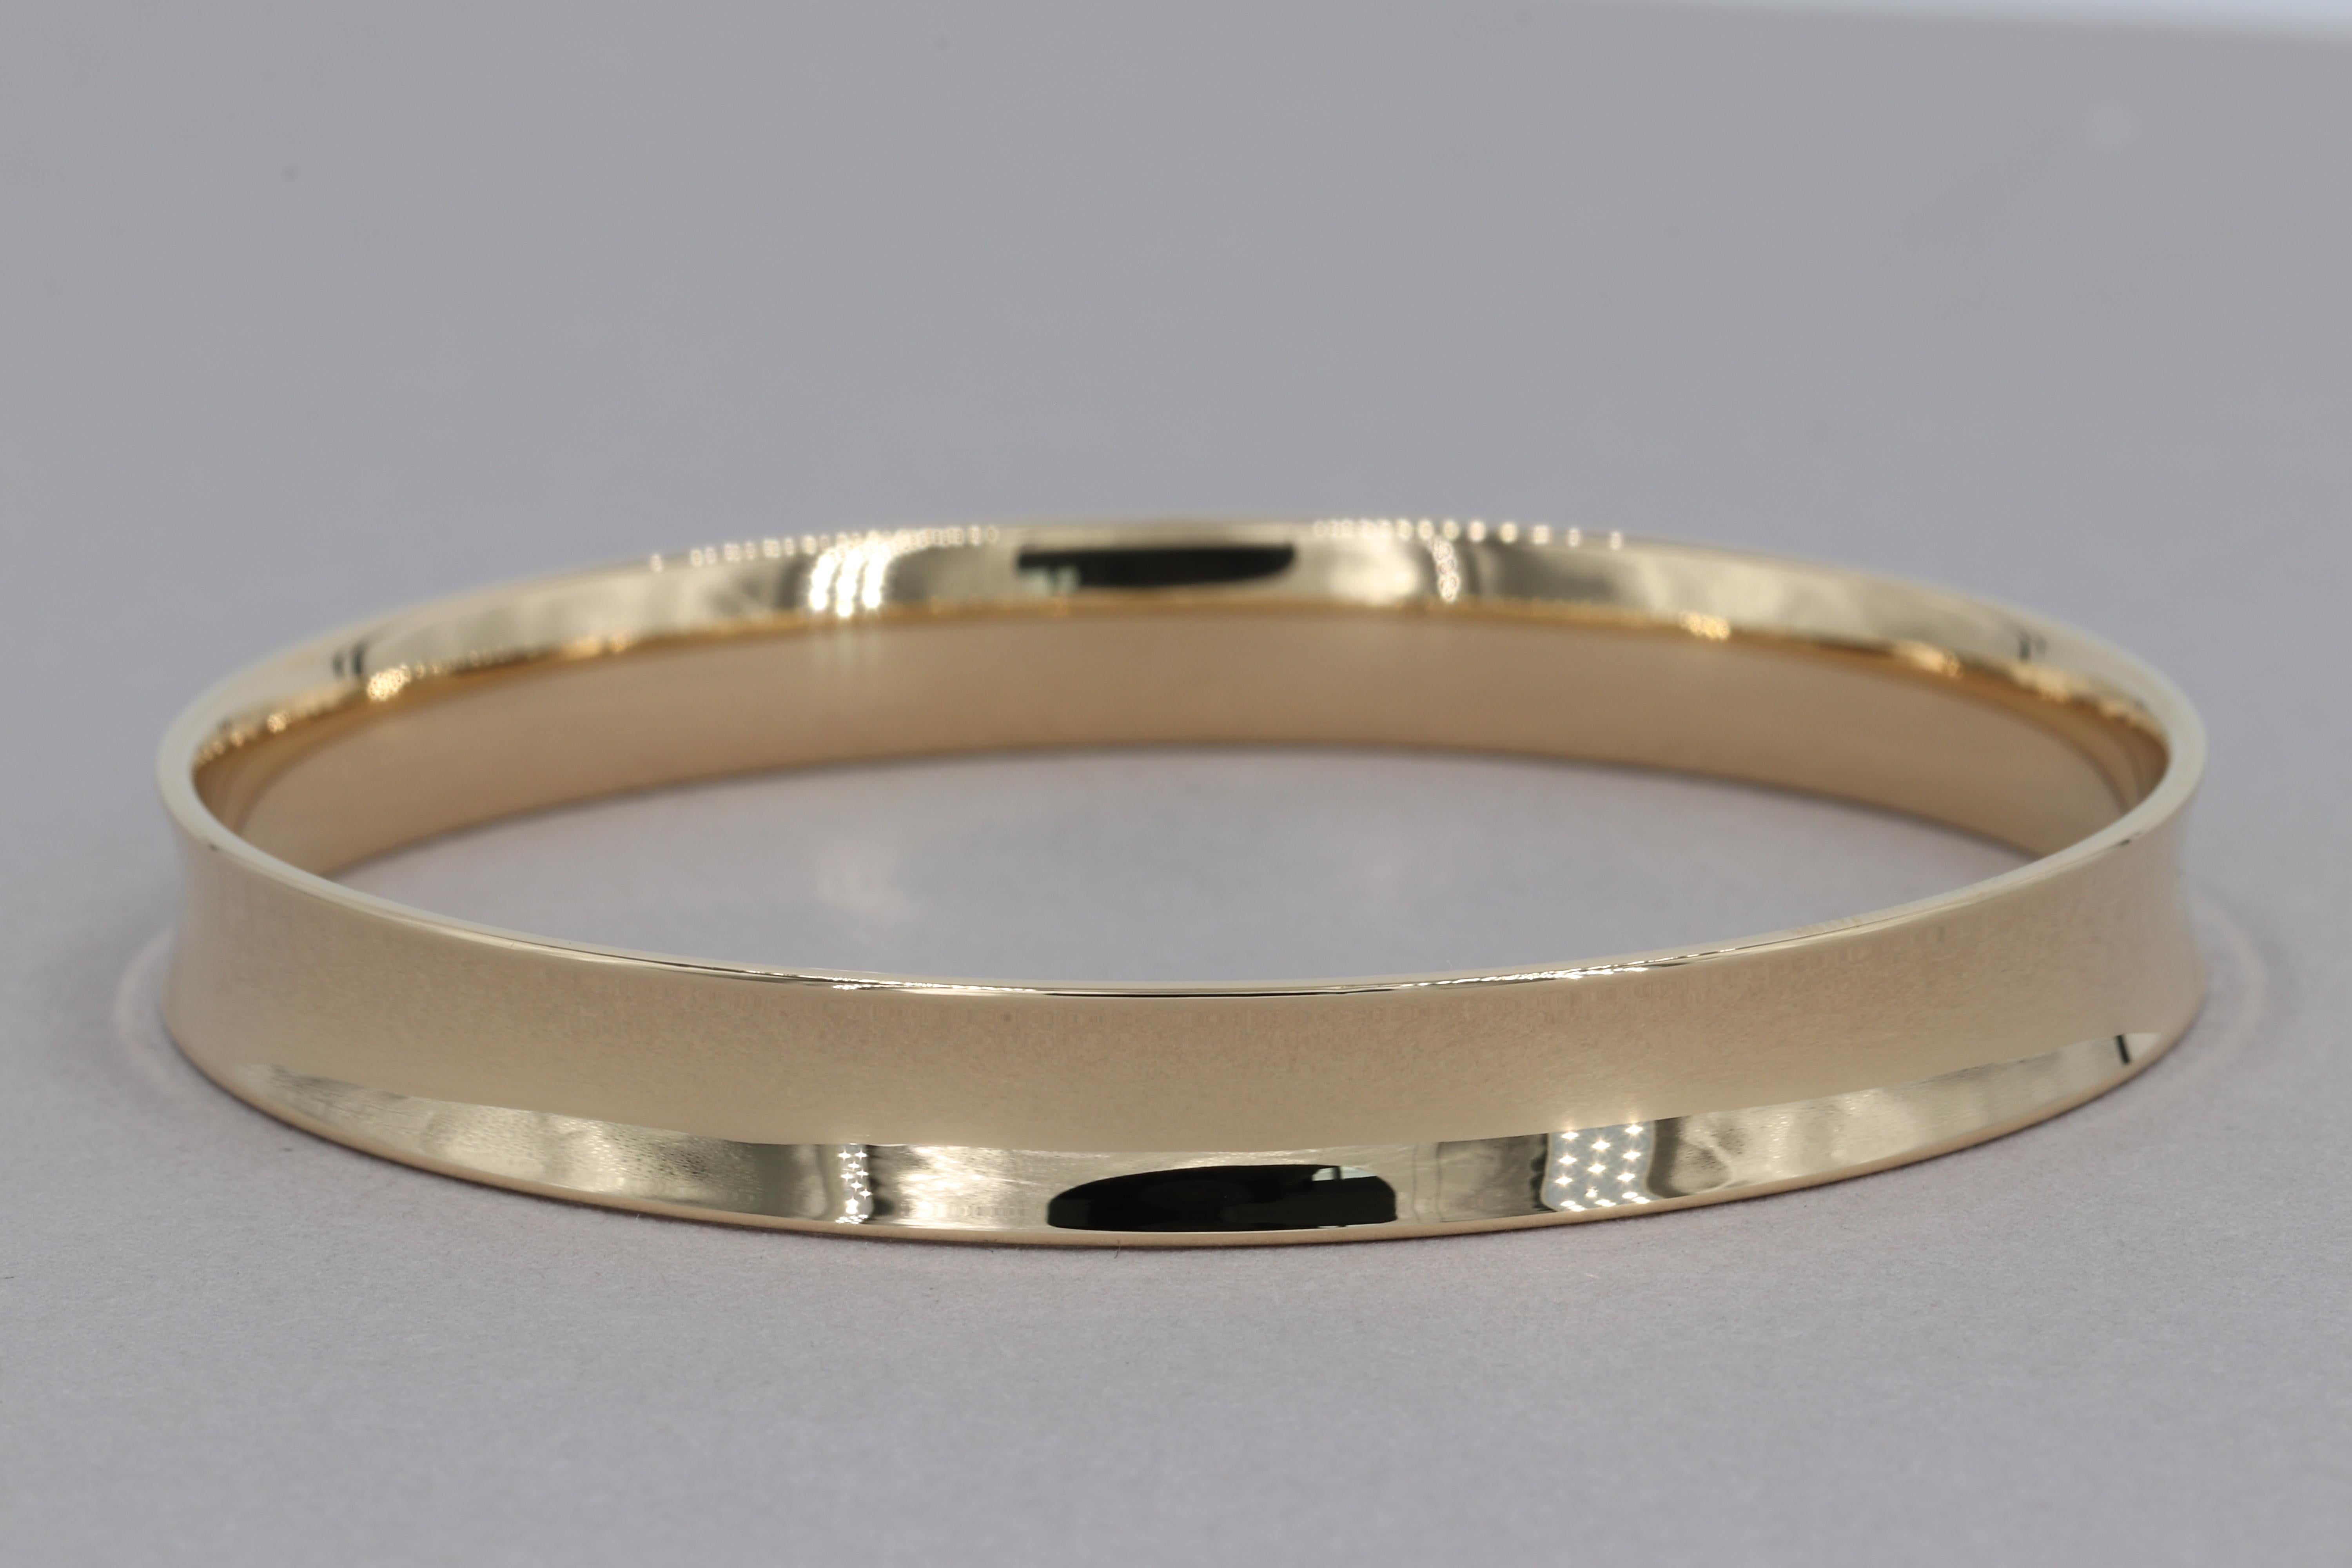 Tiffany & Co. 1837 Bangle Bracelet 18 Karat Yellow Gold In Excellent Condition For Sale In Tampa, FL